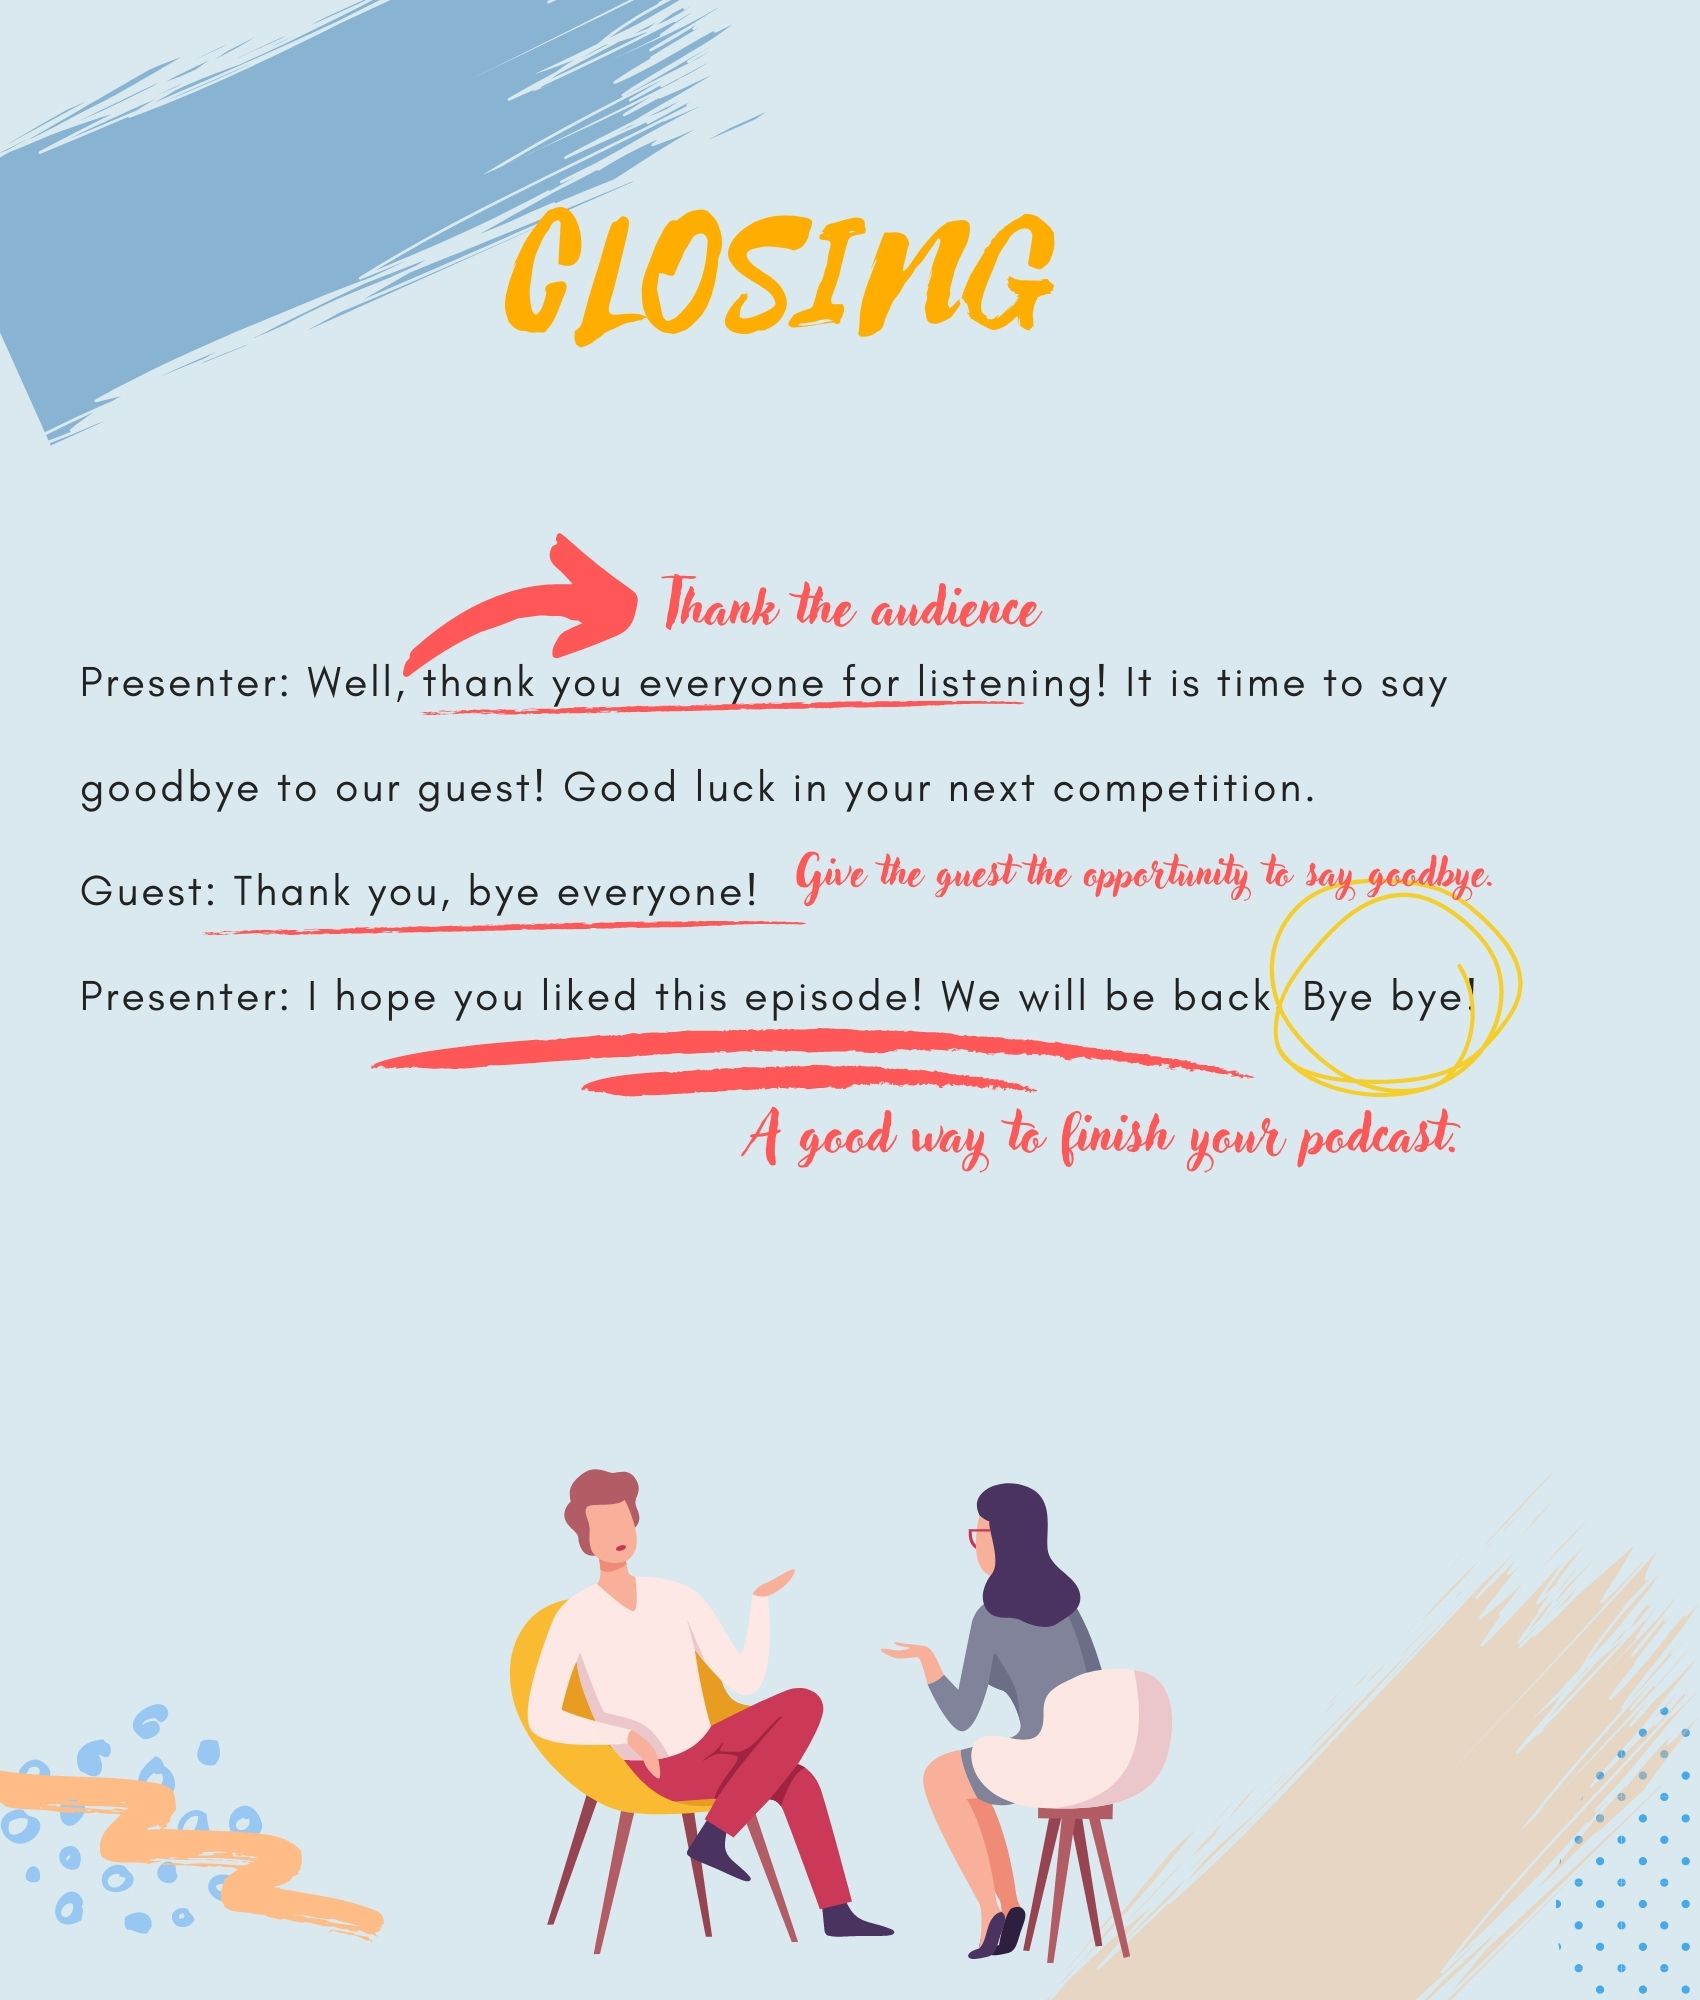 Example of closing